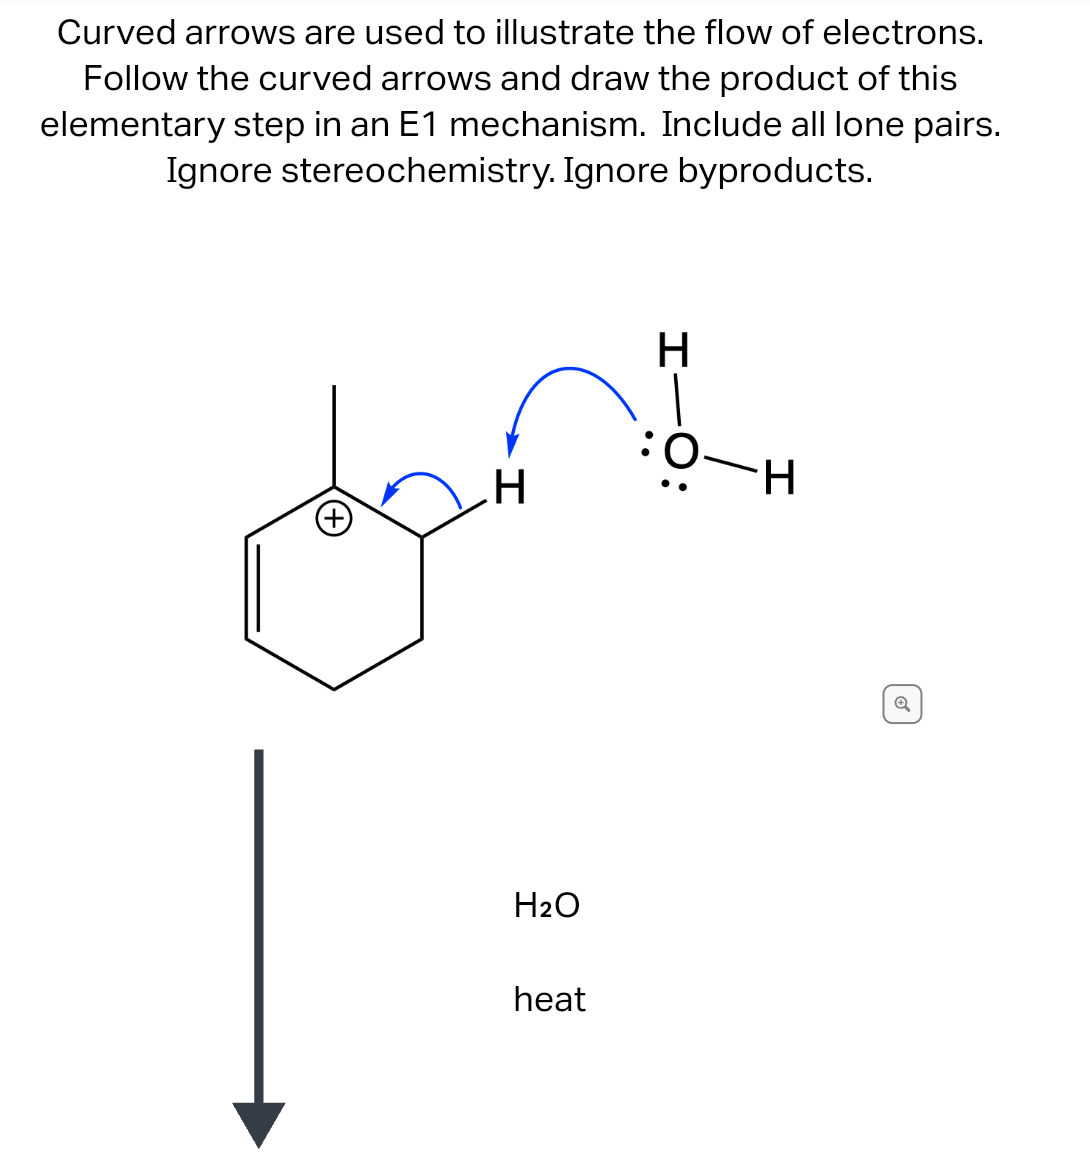 Curved arrows are used to illustrate the flow of electrons.
Follow the curved arrows and draw the product of this
elementary step in an E1 mechanism. Include all lone pairs.
Ignore stereochemistry. Ignore byproducts.
:0
H
dant
H₂O
H
heat
H
Q